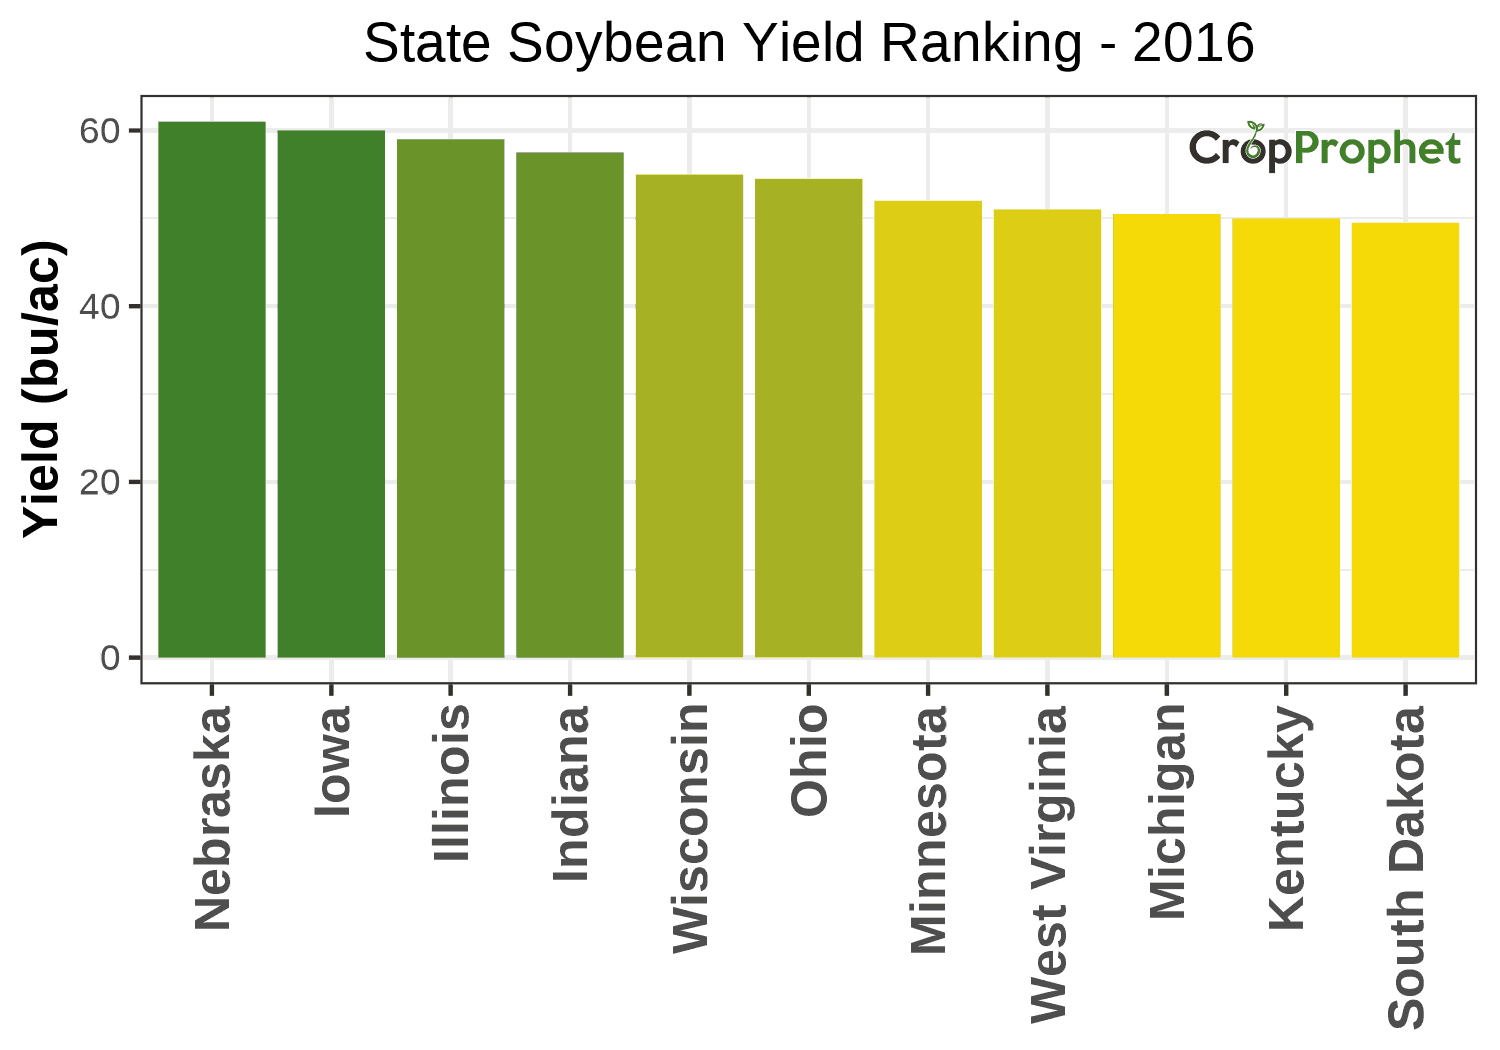 Soybean Production by State - 2016 Rankings